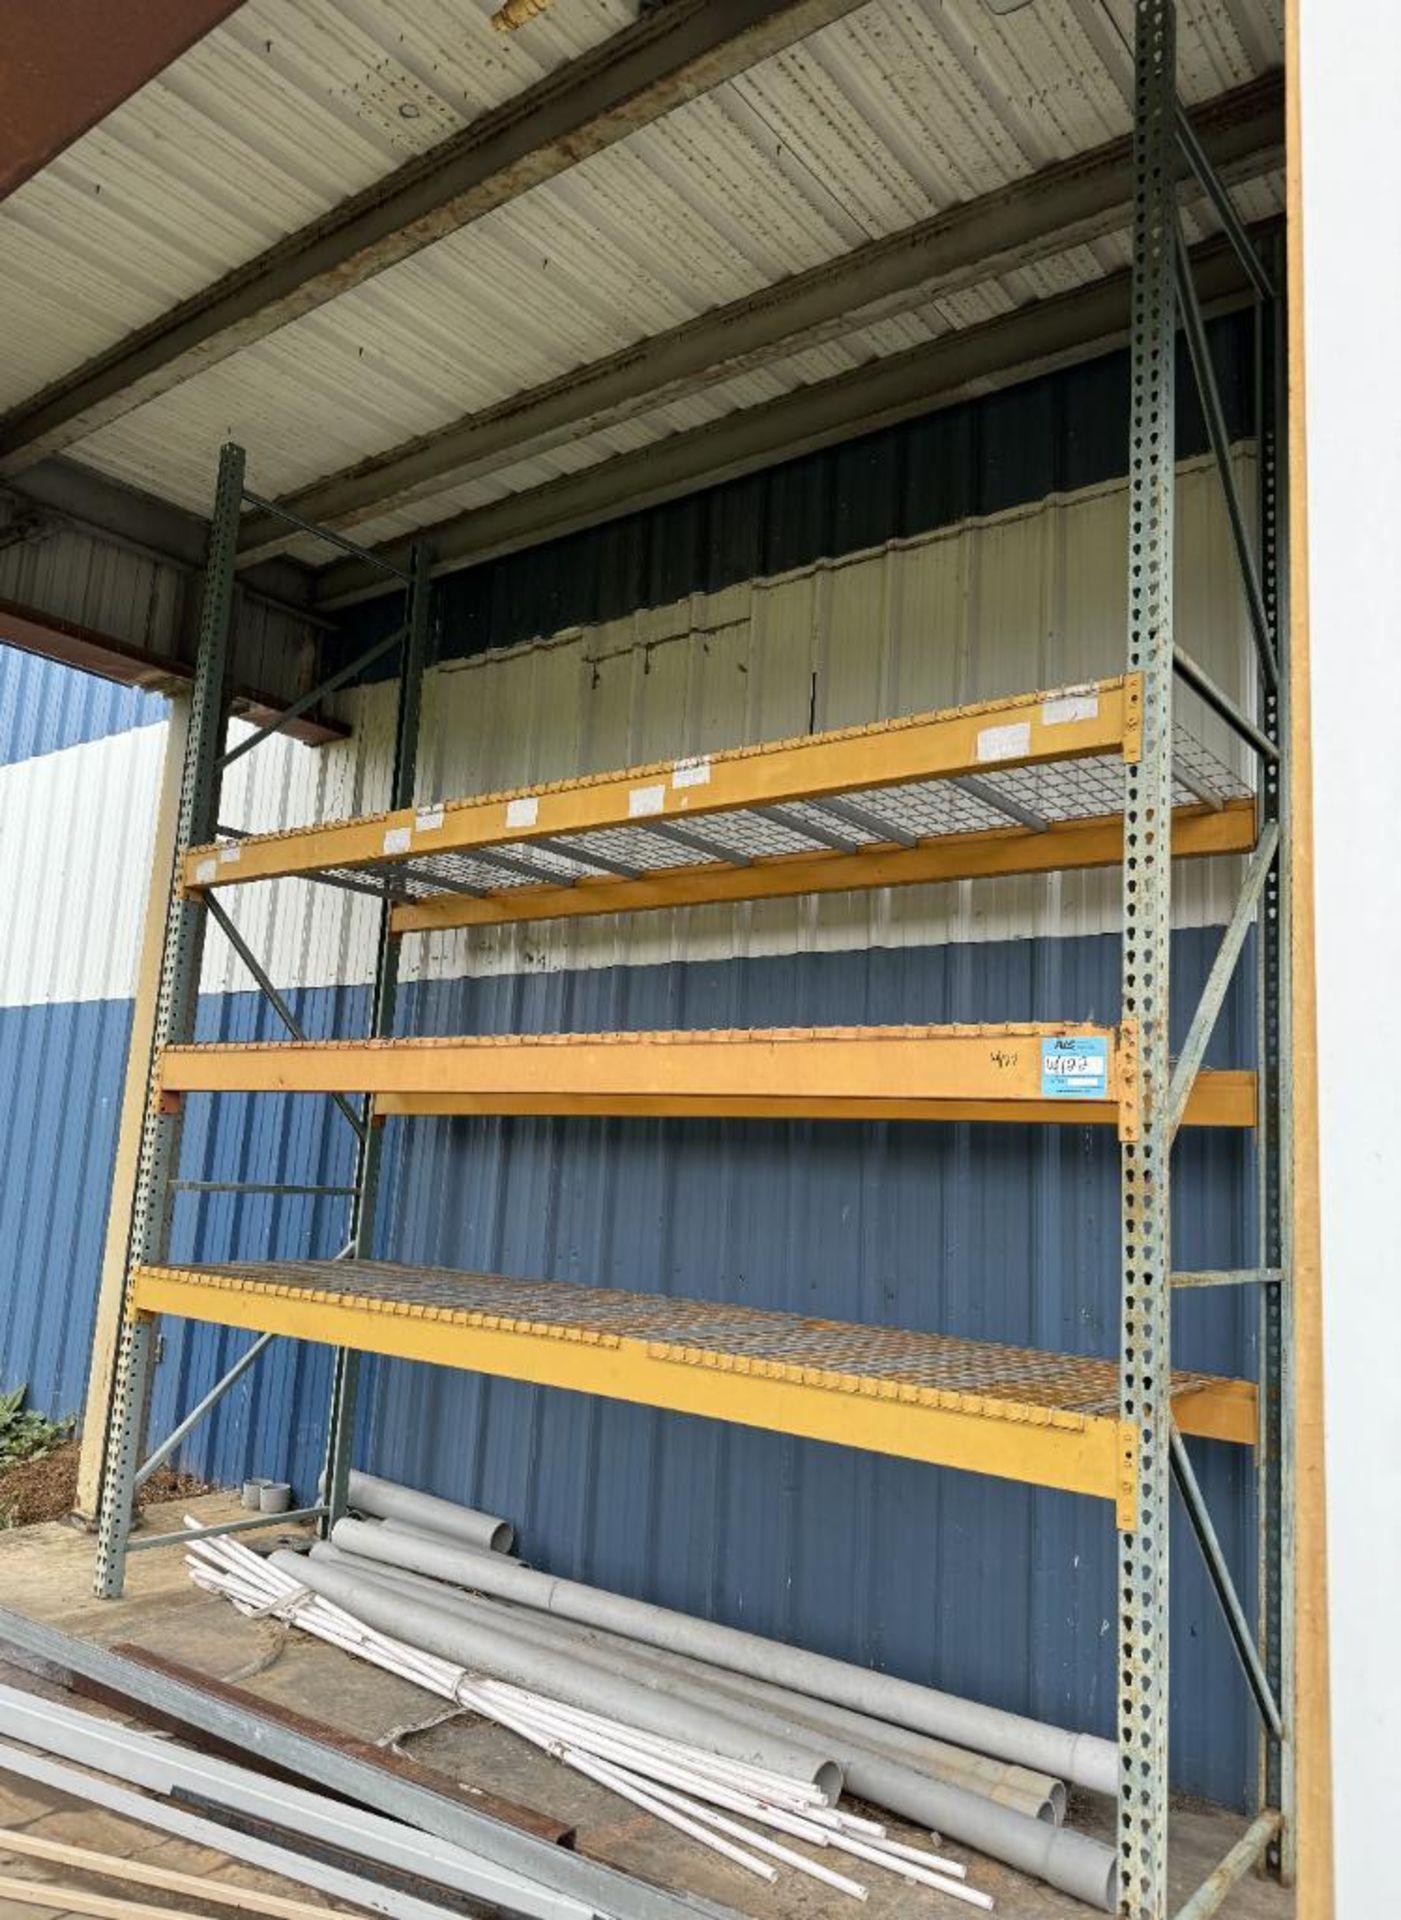 Lot Consisting Of: (1) Section Of 42" Deep Teardrop Pallet Racking. With (2) 174" tall uprights, (6)